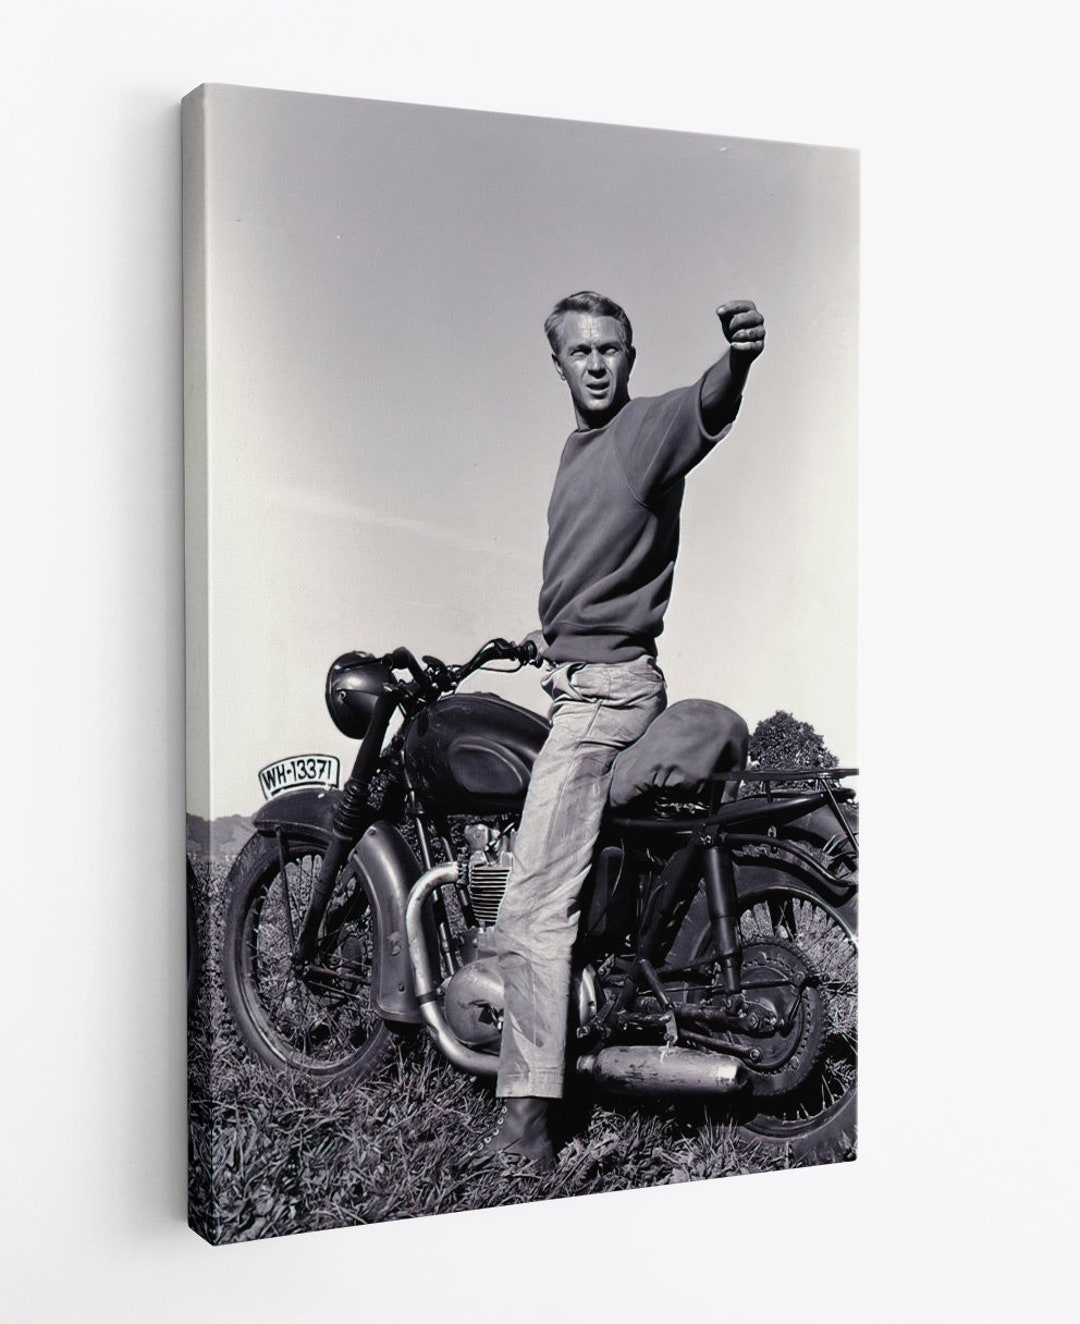 Steve McQueen Edition Triumph Motorcycle Ready for a Great Escape